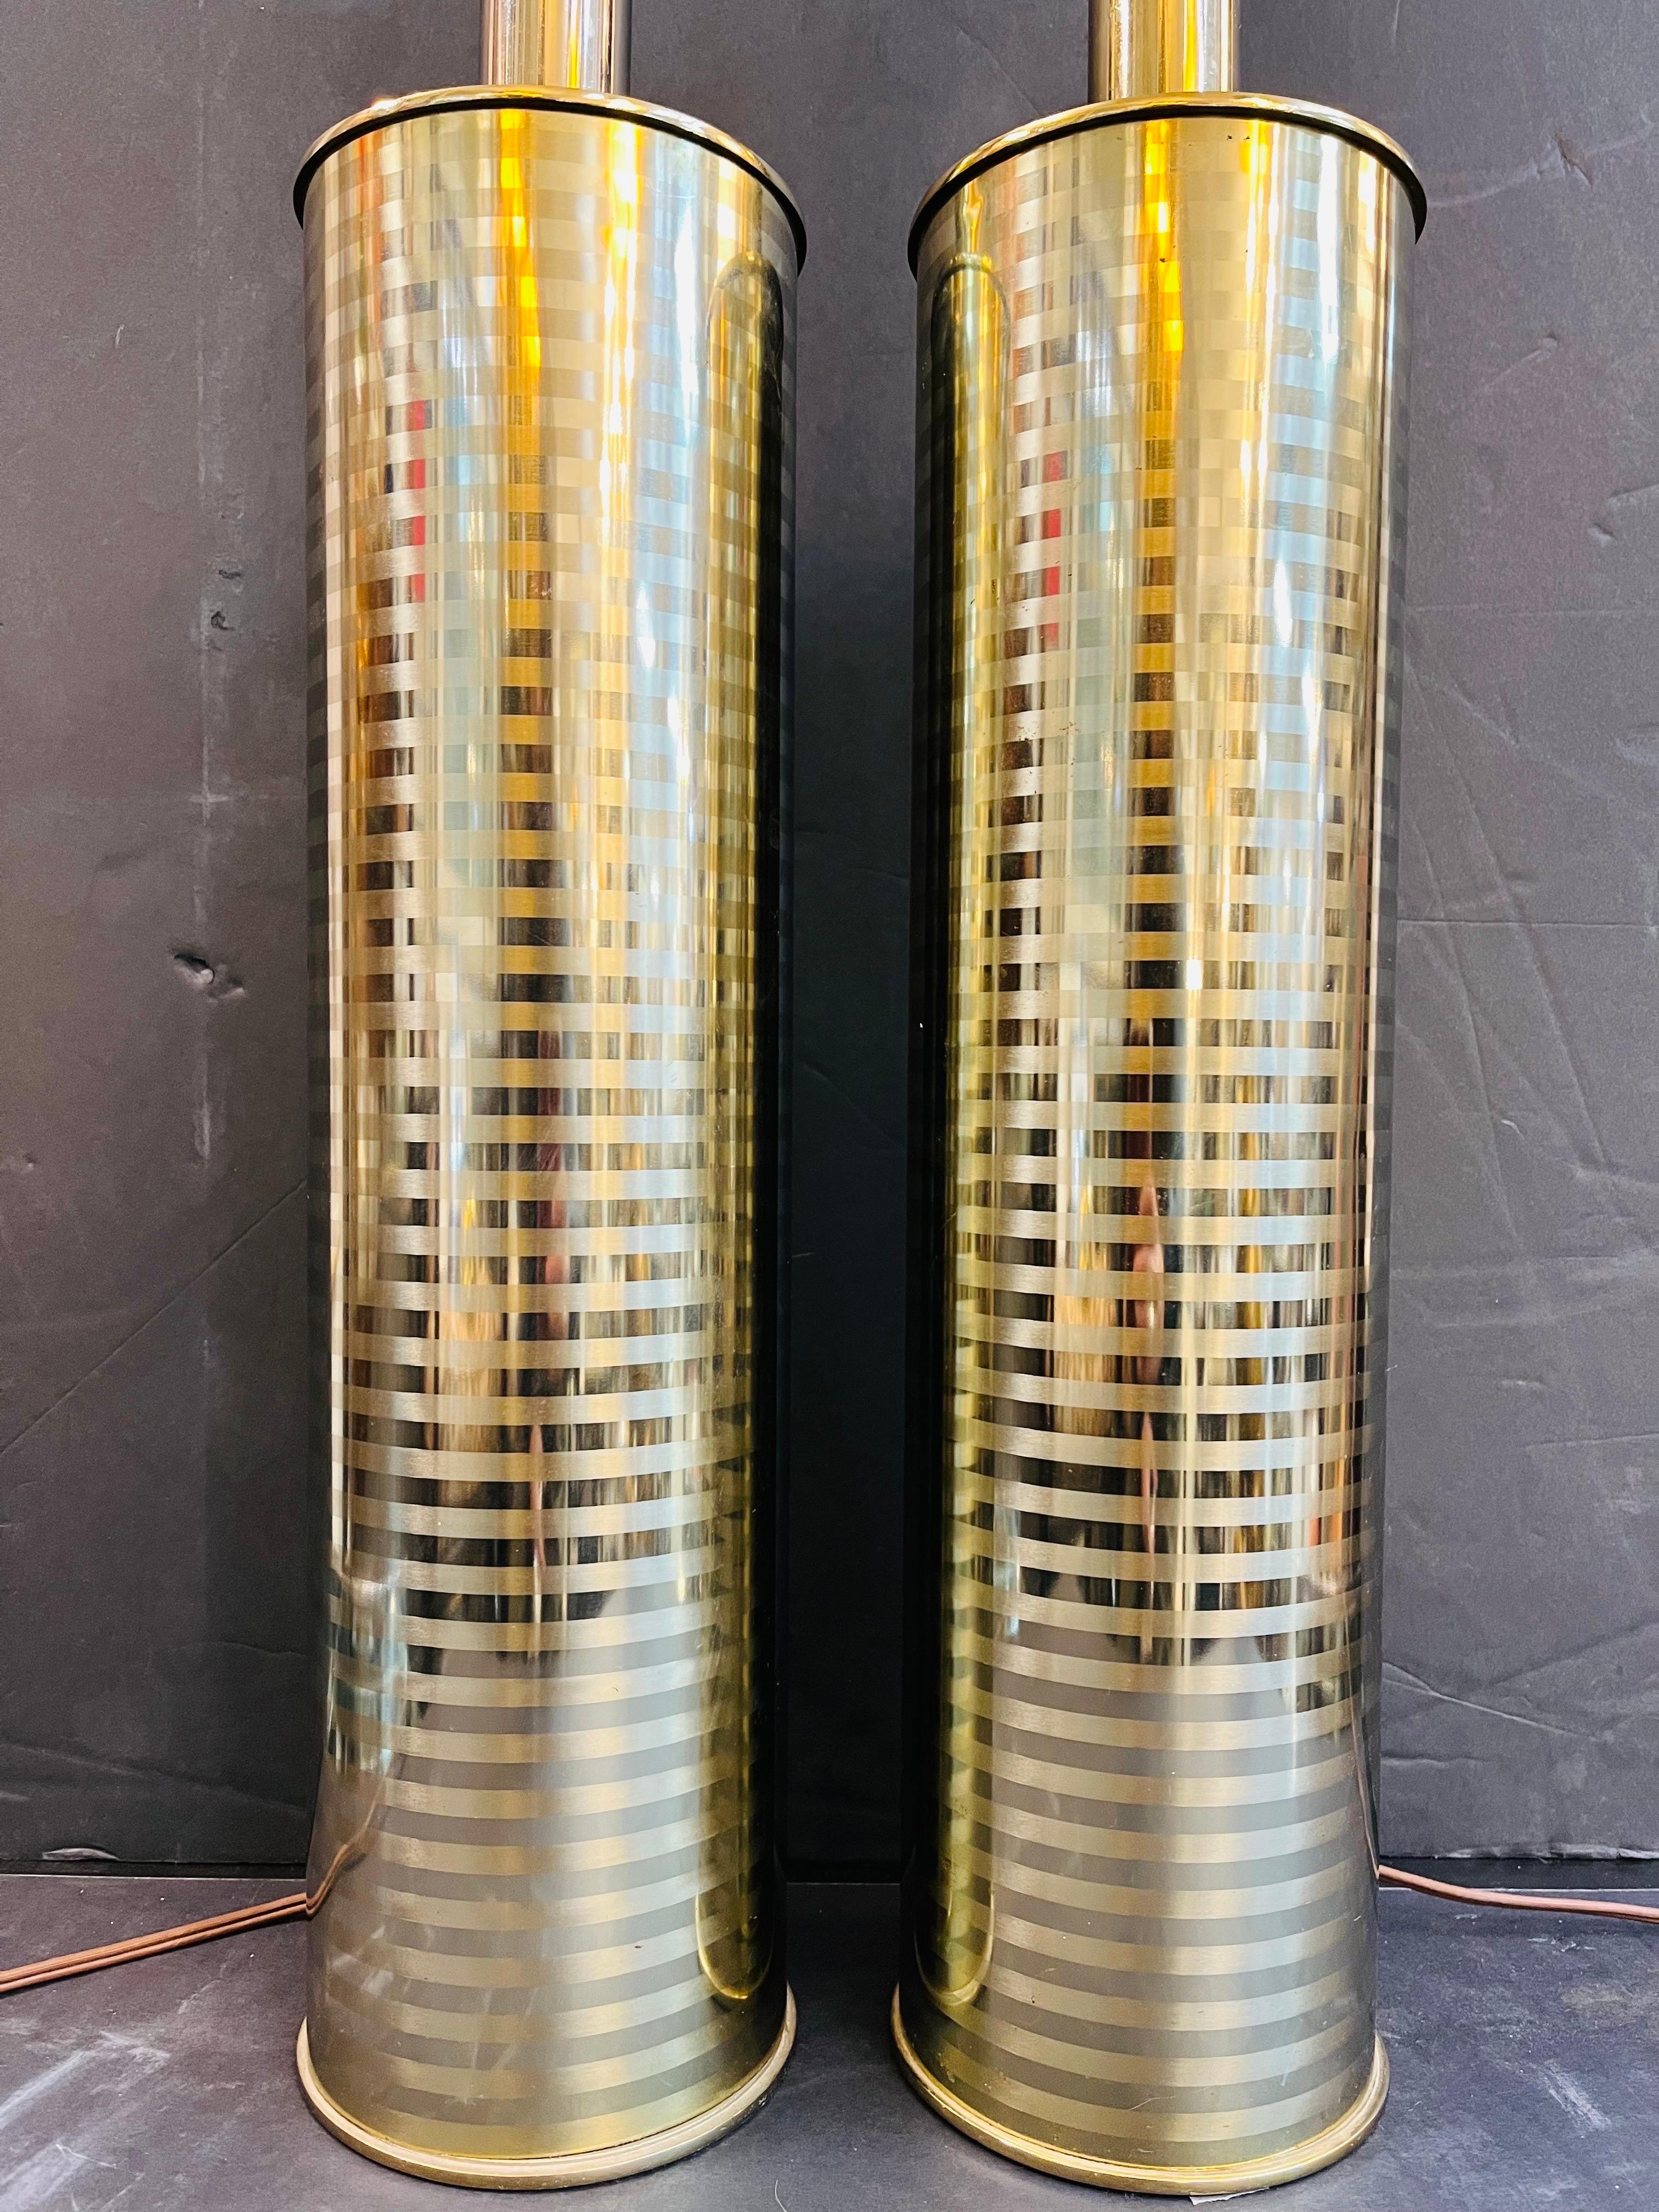 A vintage pair of mid century modern style lamps by the well known Laurel Lamp Company. Laurel was founded in New Jersey by the Weiss Brothers, Harold and Max, in 1941. The company produced a staggering variety of atomic era lighting from in house